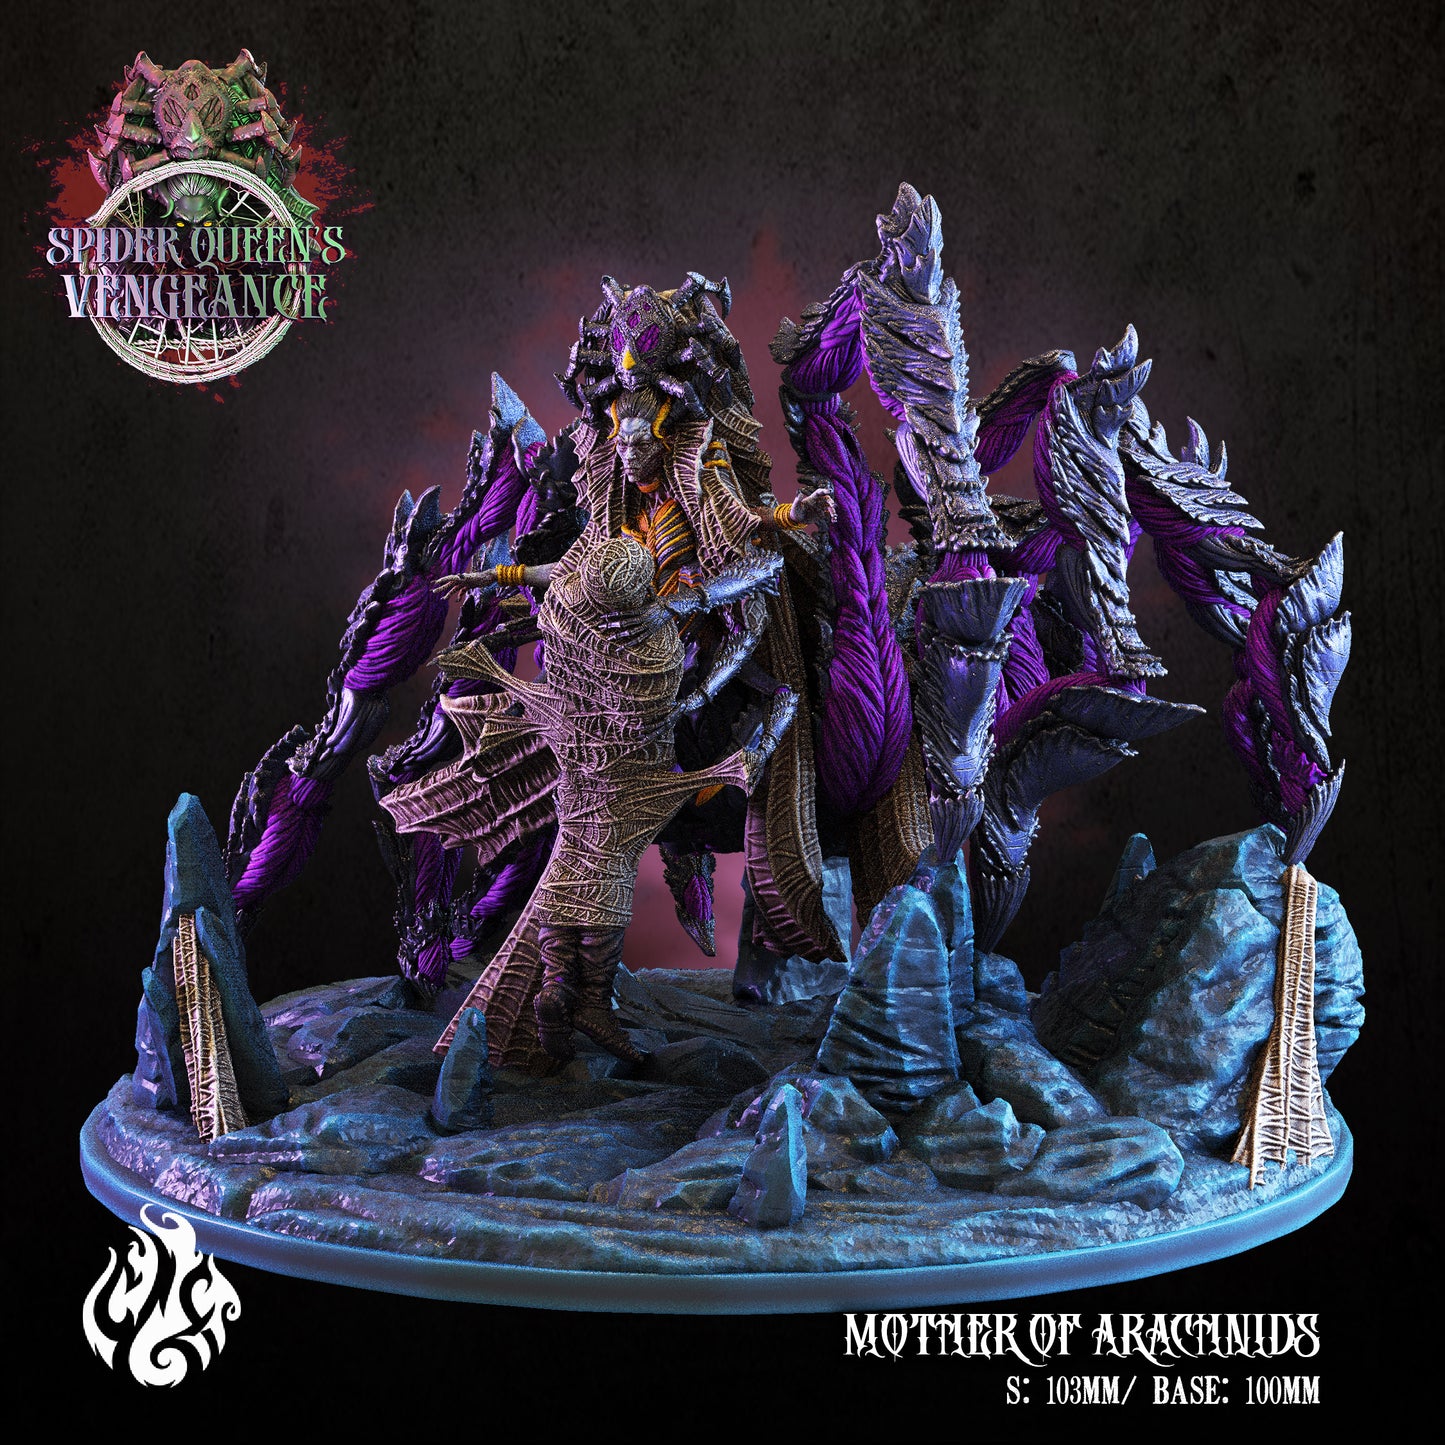 Mother of Arachnids the Spider Queen Spider Queen's Vengeance Series from Crippled God Foundry - Table-top gaming mini and collectable for painting.